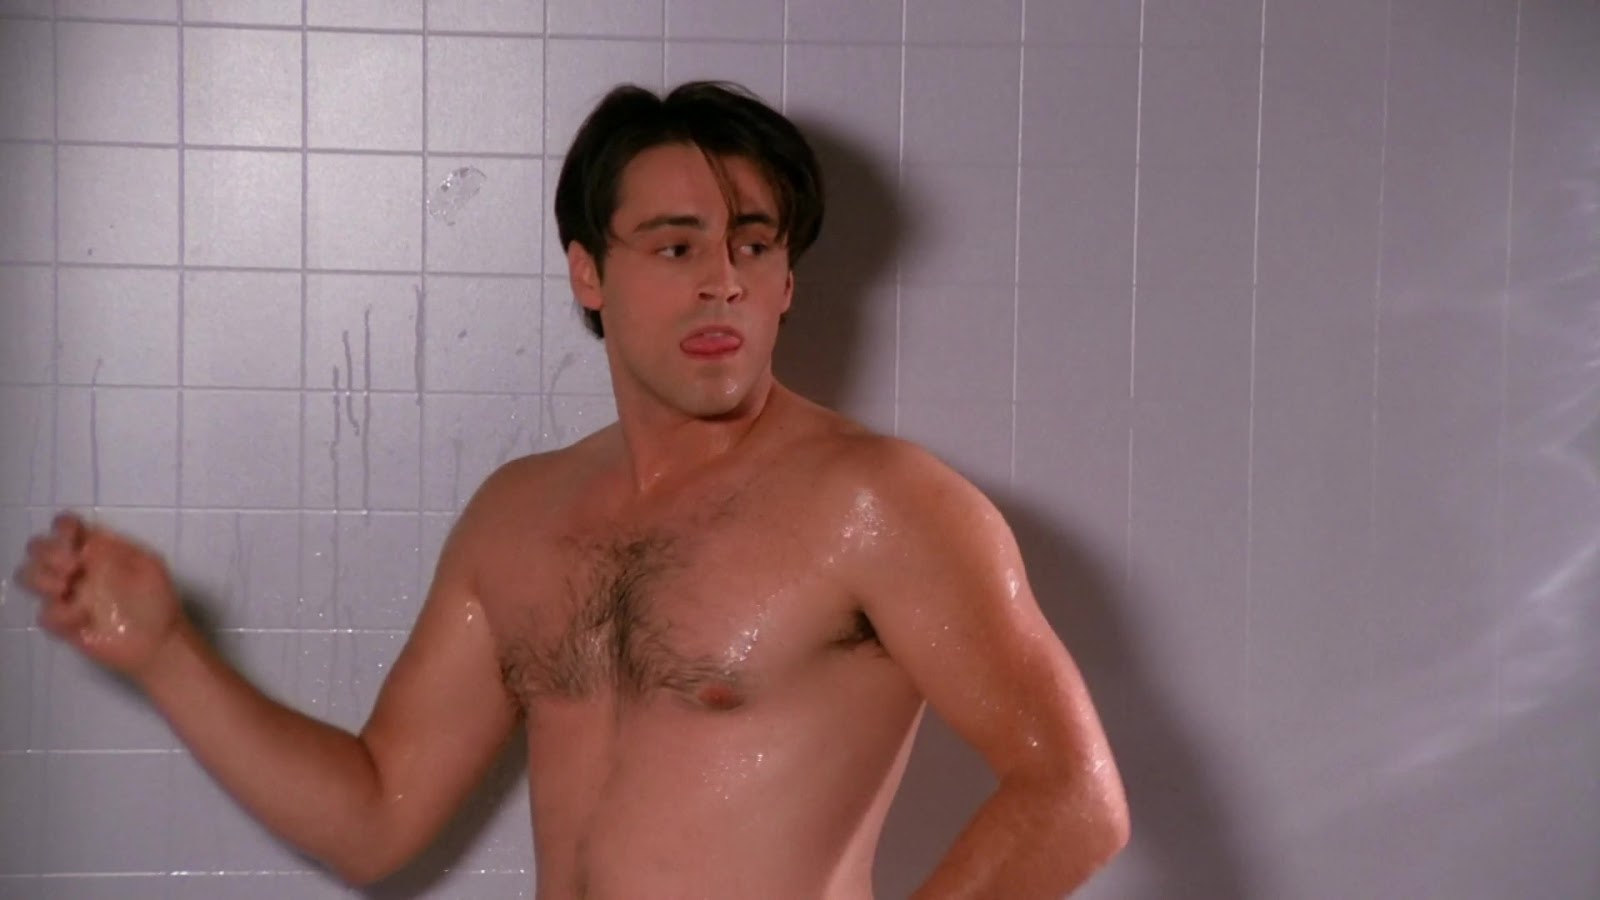 Matt LeBlanc shirtless in Friends 1-06 "The One With The Butt" .